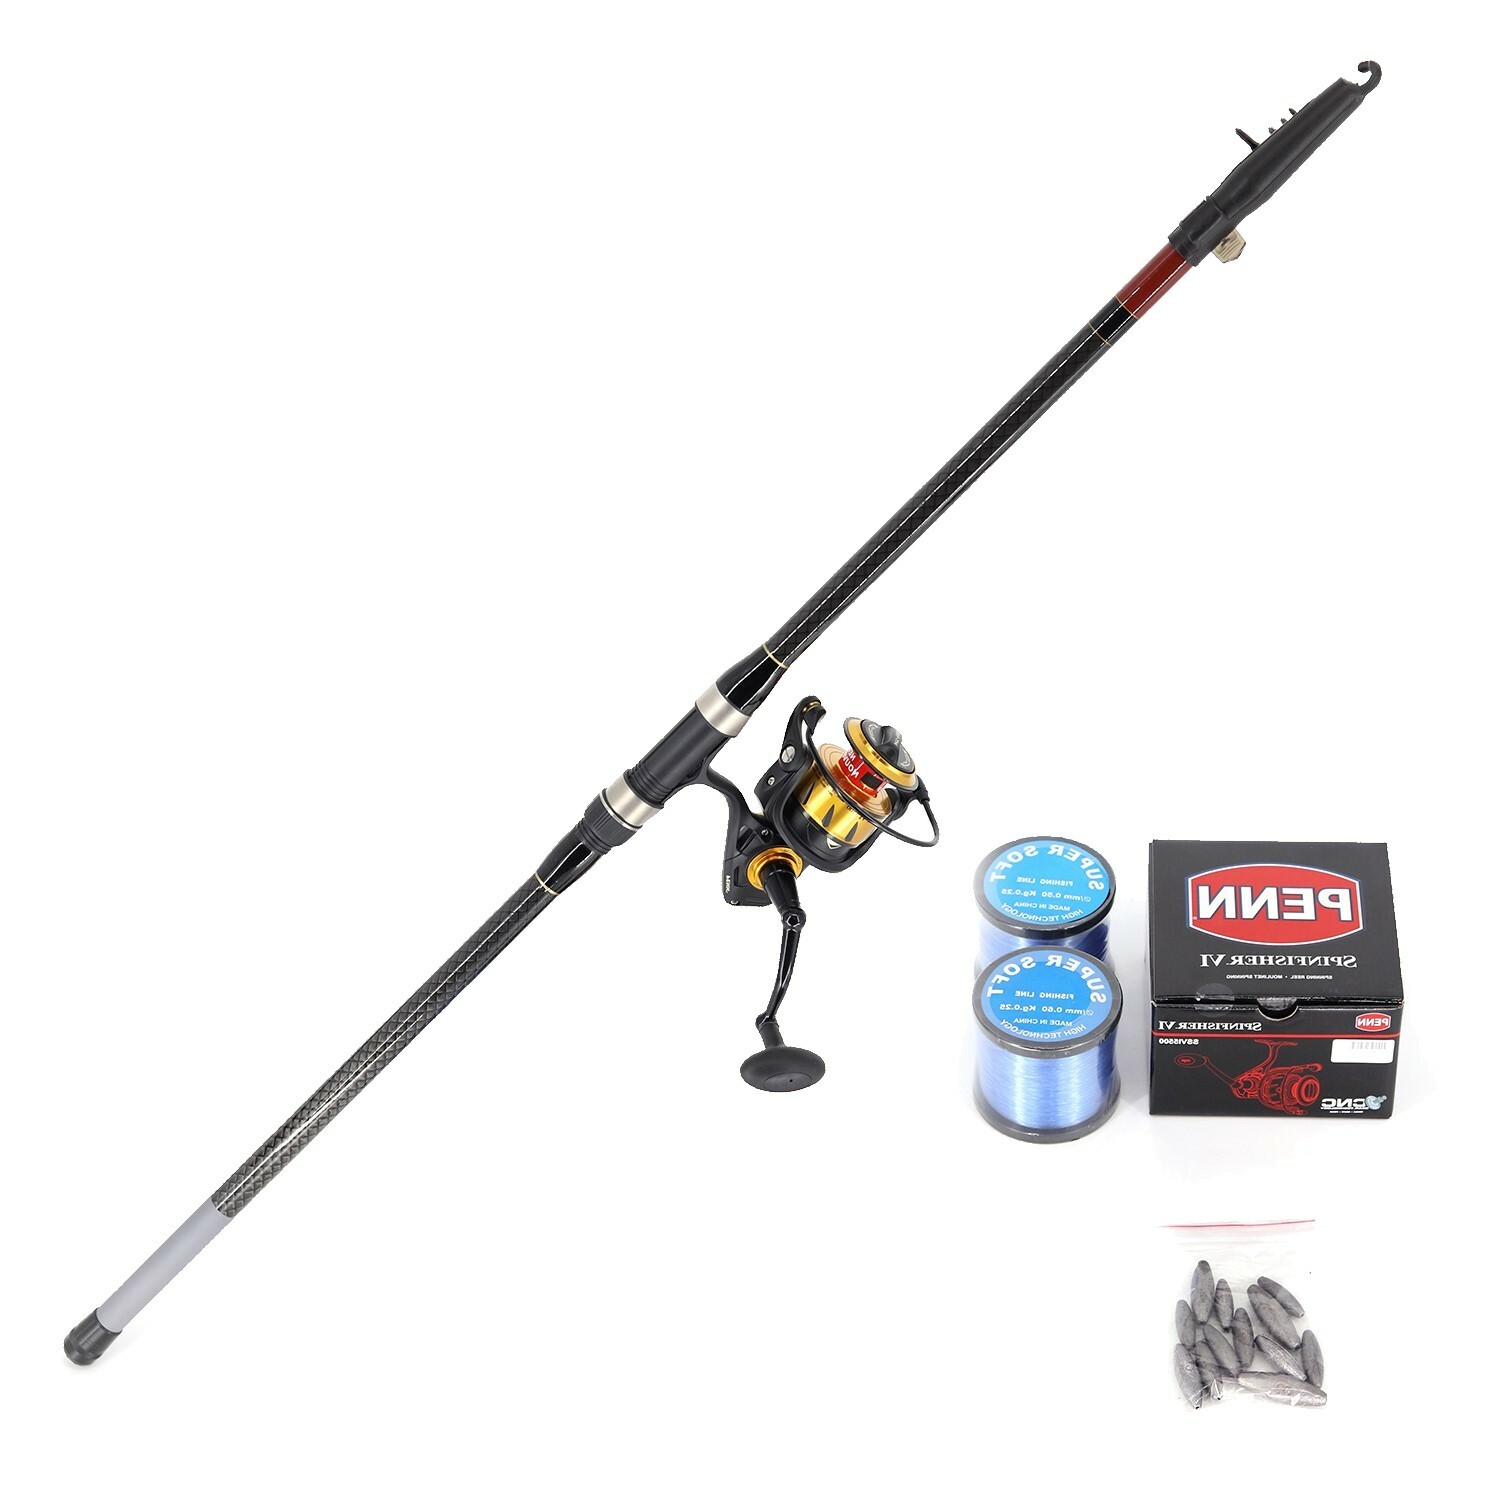 Shore Fishing (Pilot 3m and Penn VI 5500 including Nylon line with rigs and sinkers) Combo